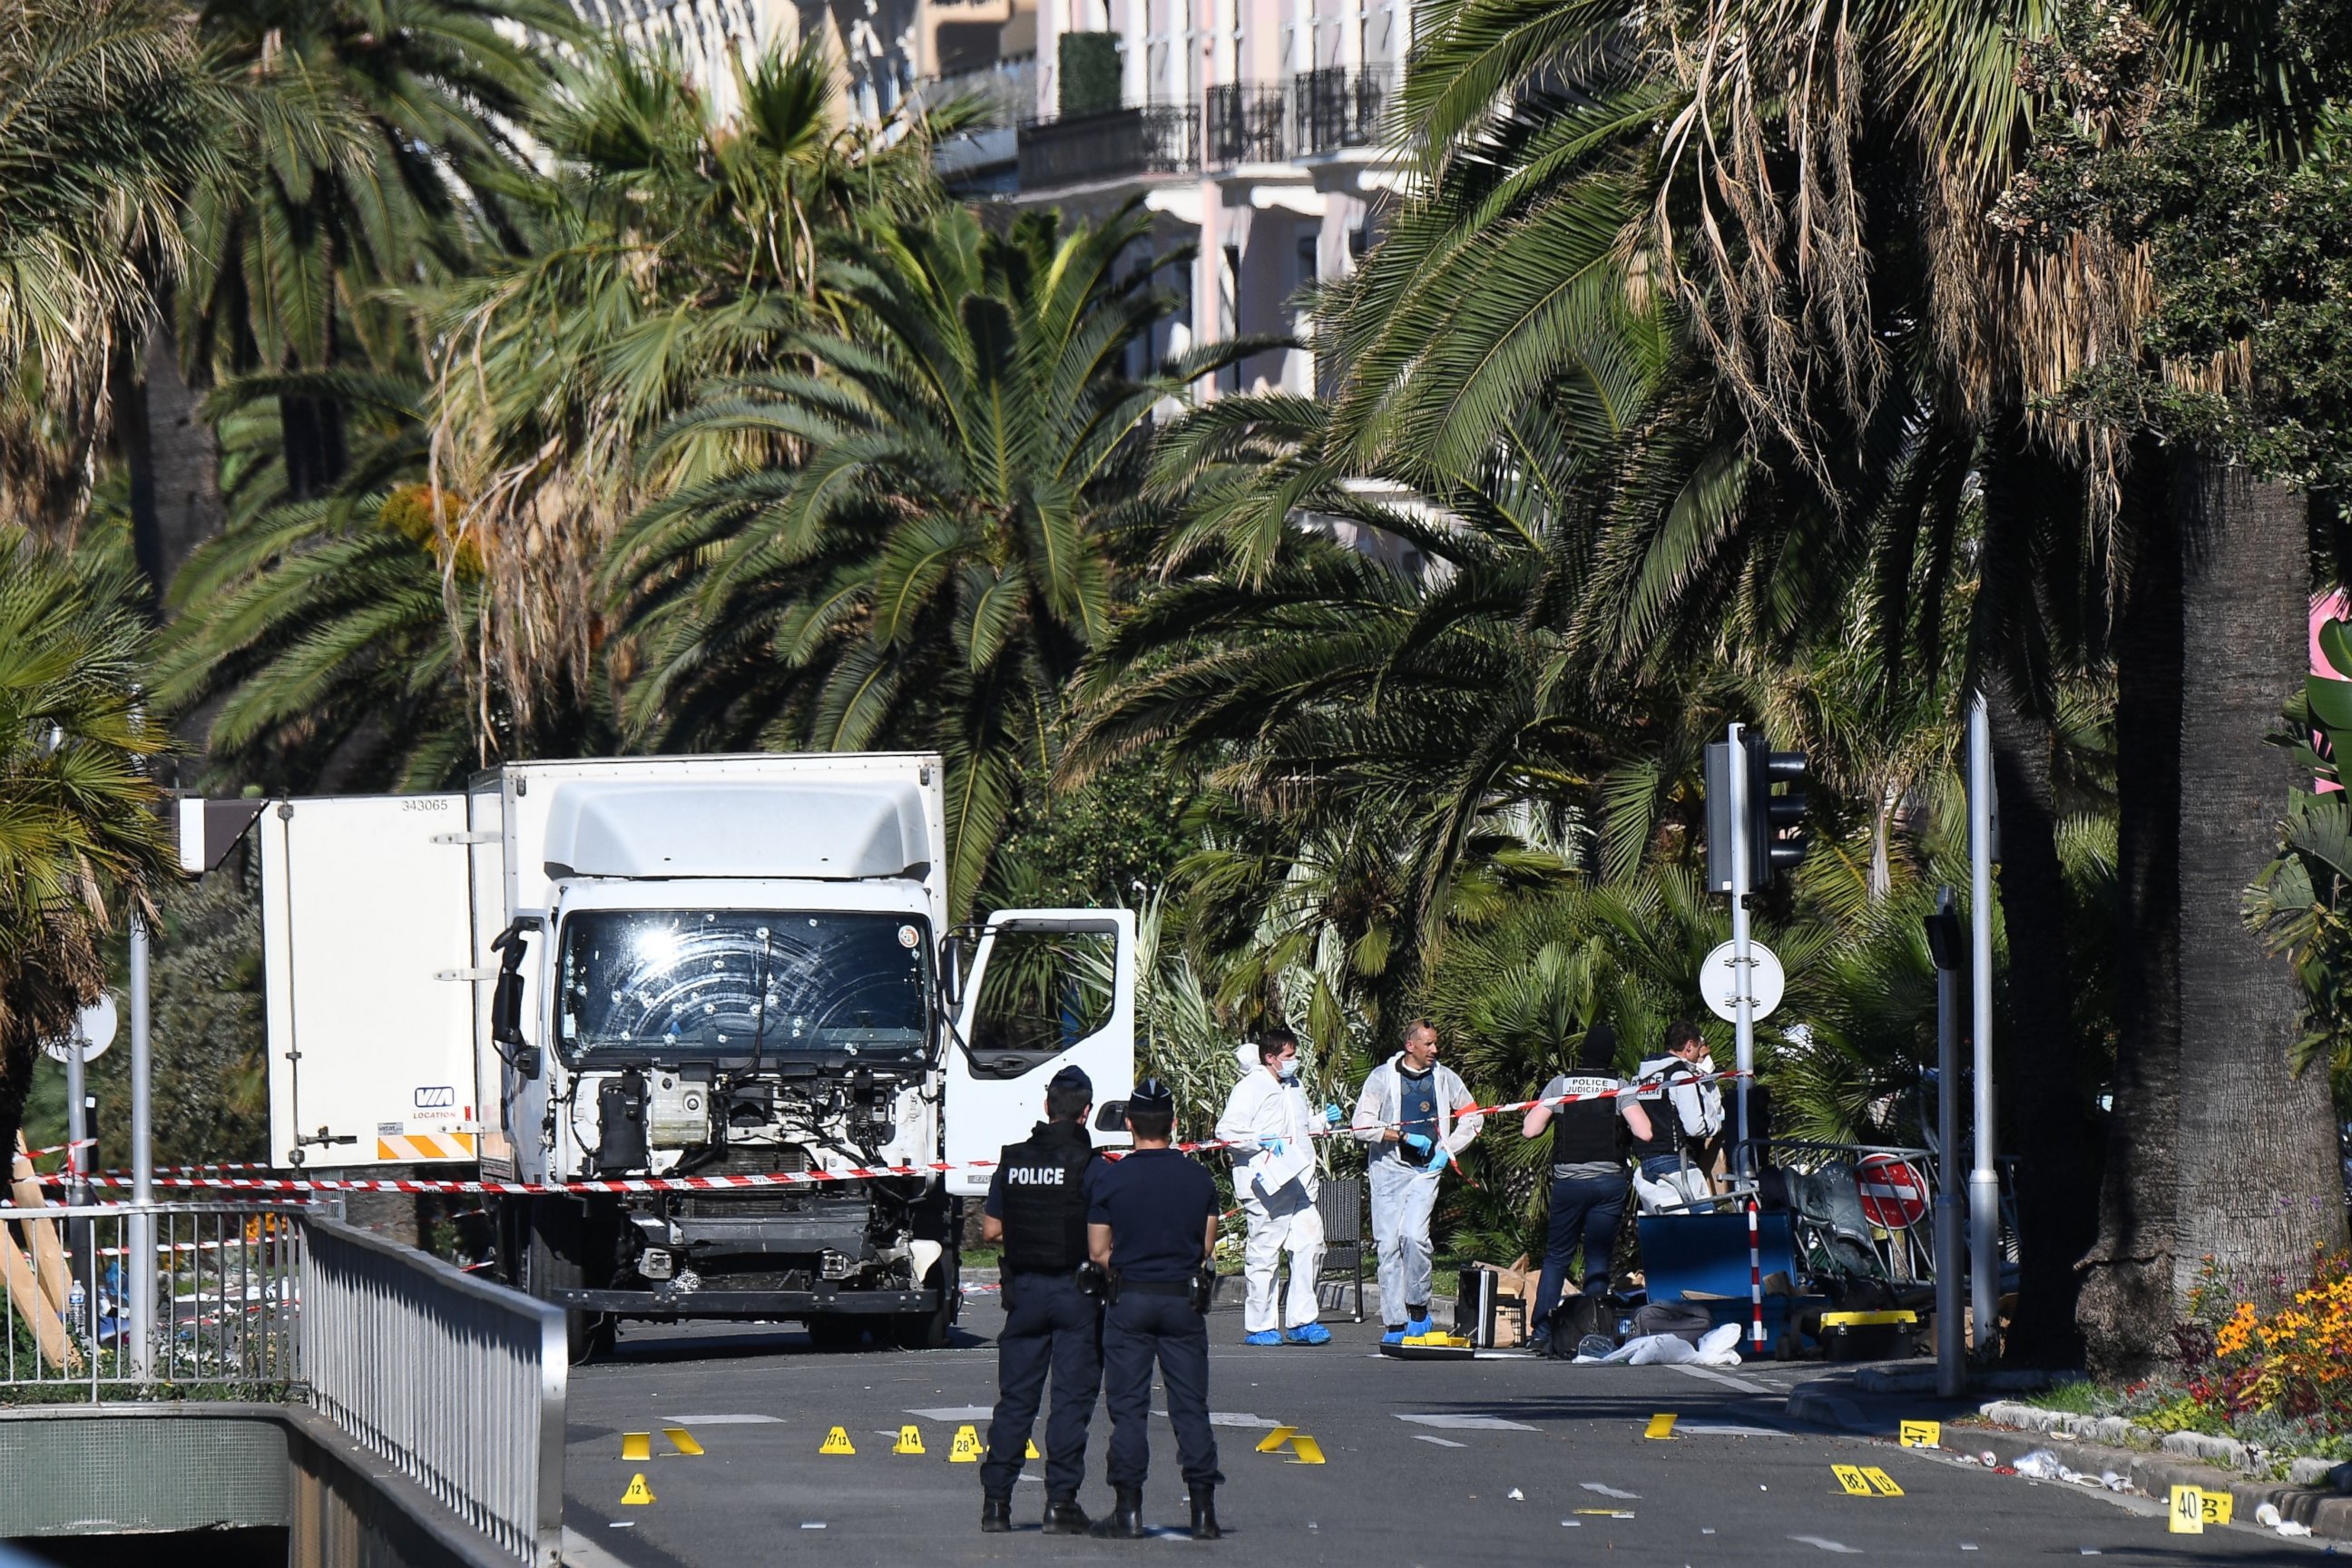 PHOTO: Forensics officers and policemen look for evidence near a truck on the Promenade des Anglais seafront in the French Riviera town of Nice on July 15, 2016, after it drove into a crowd watching a fireworks display.